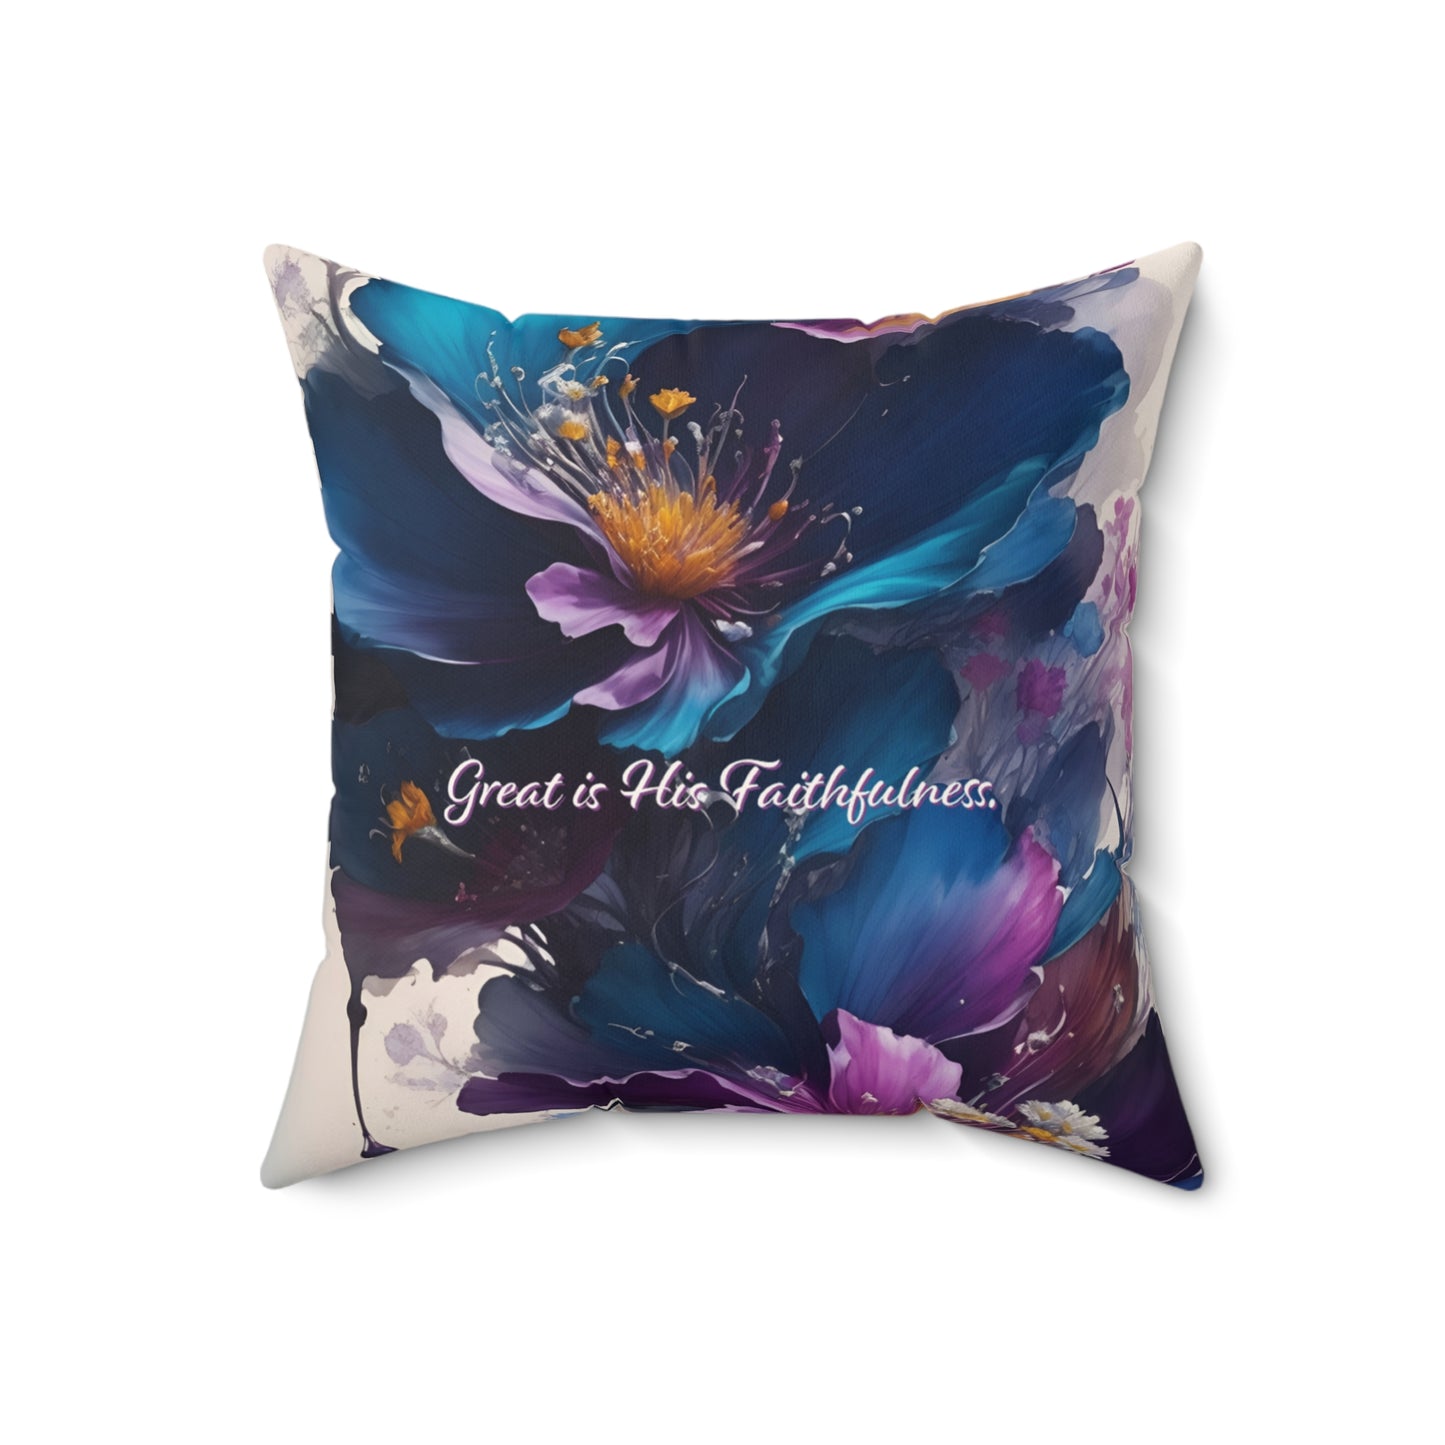 Spun Polyester Square Pillow - Great Is His Faithfulness